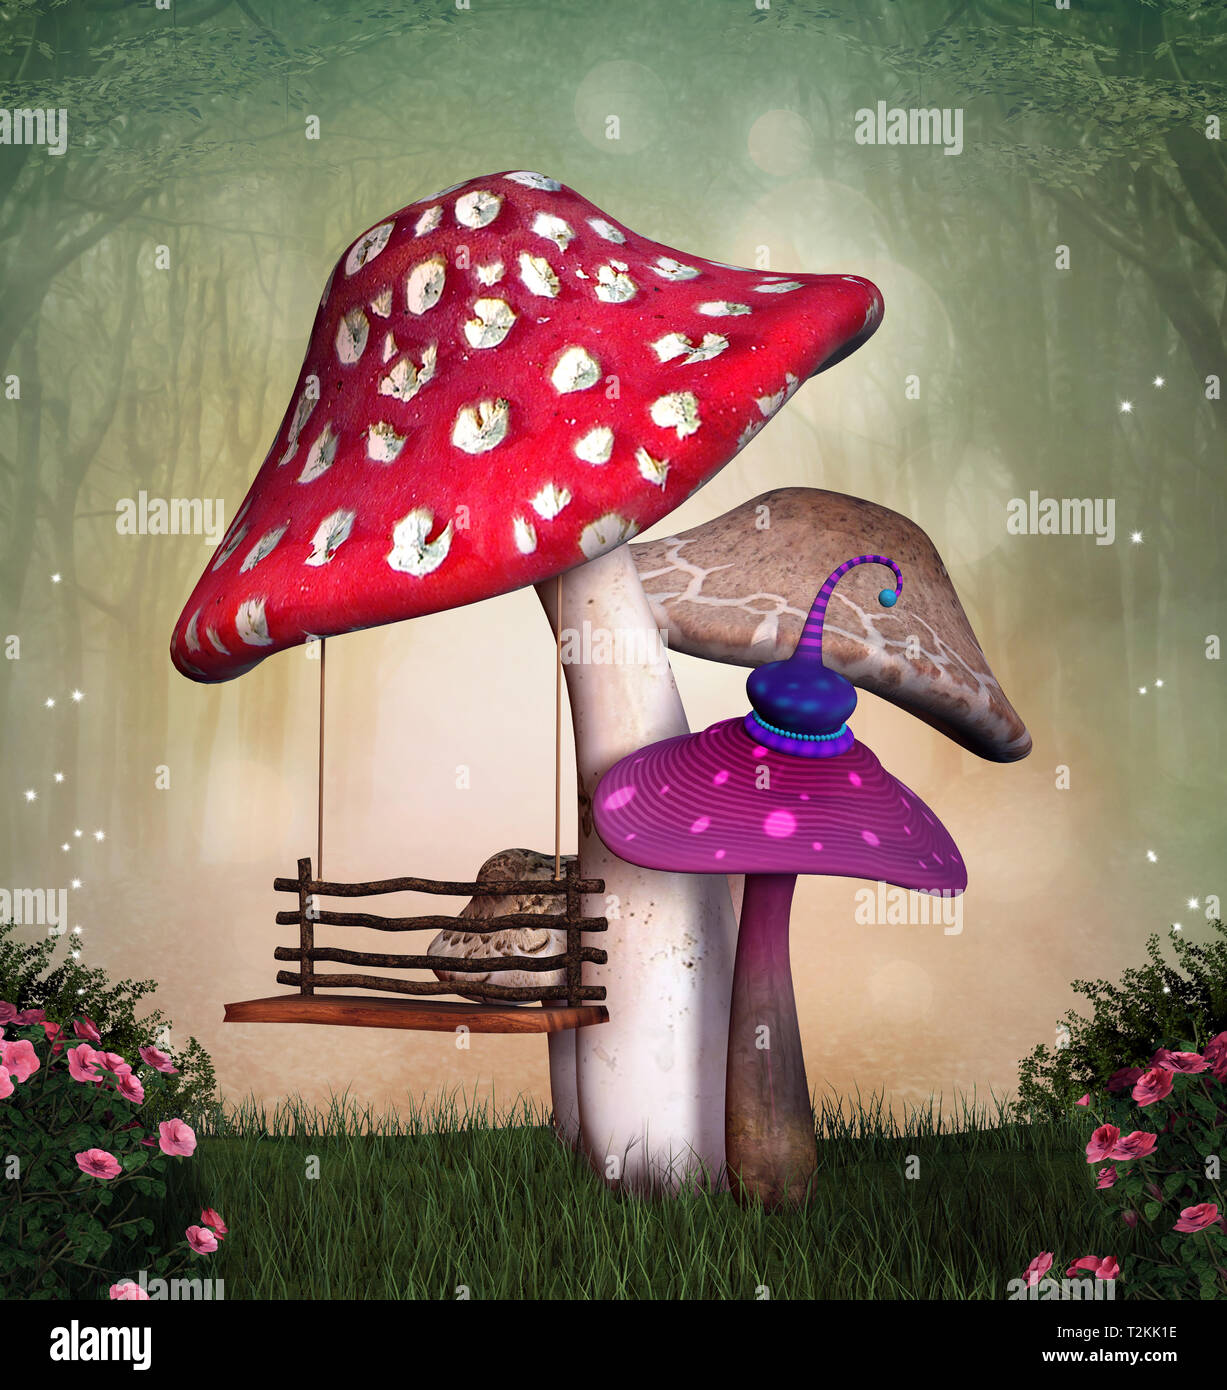 Fantasy garden with colorful mushrooms and a swing Stock Photo